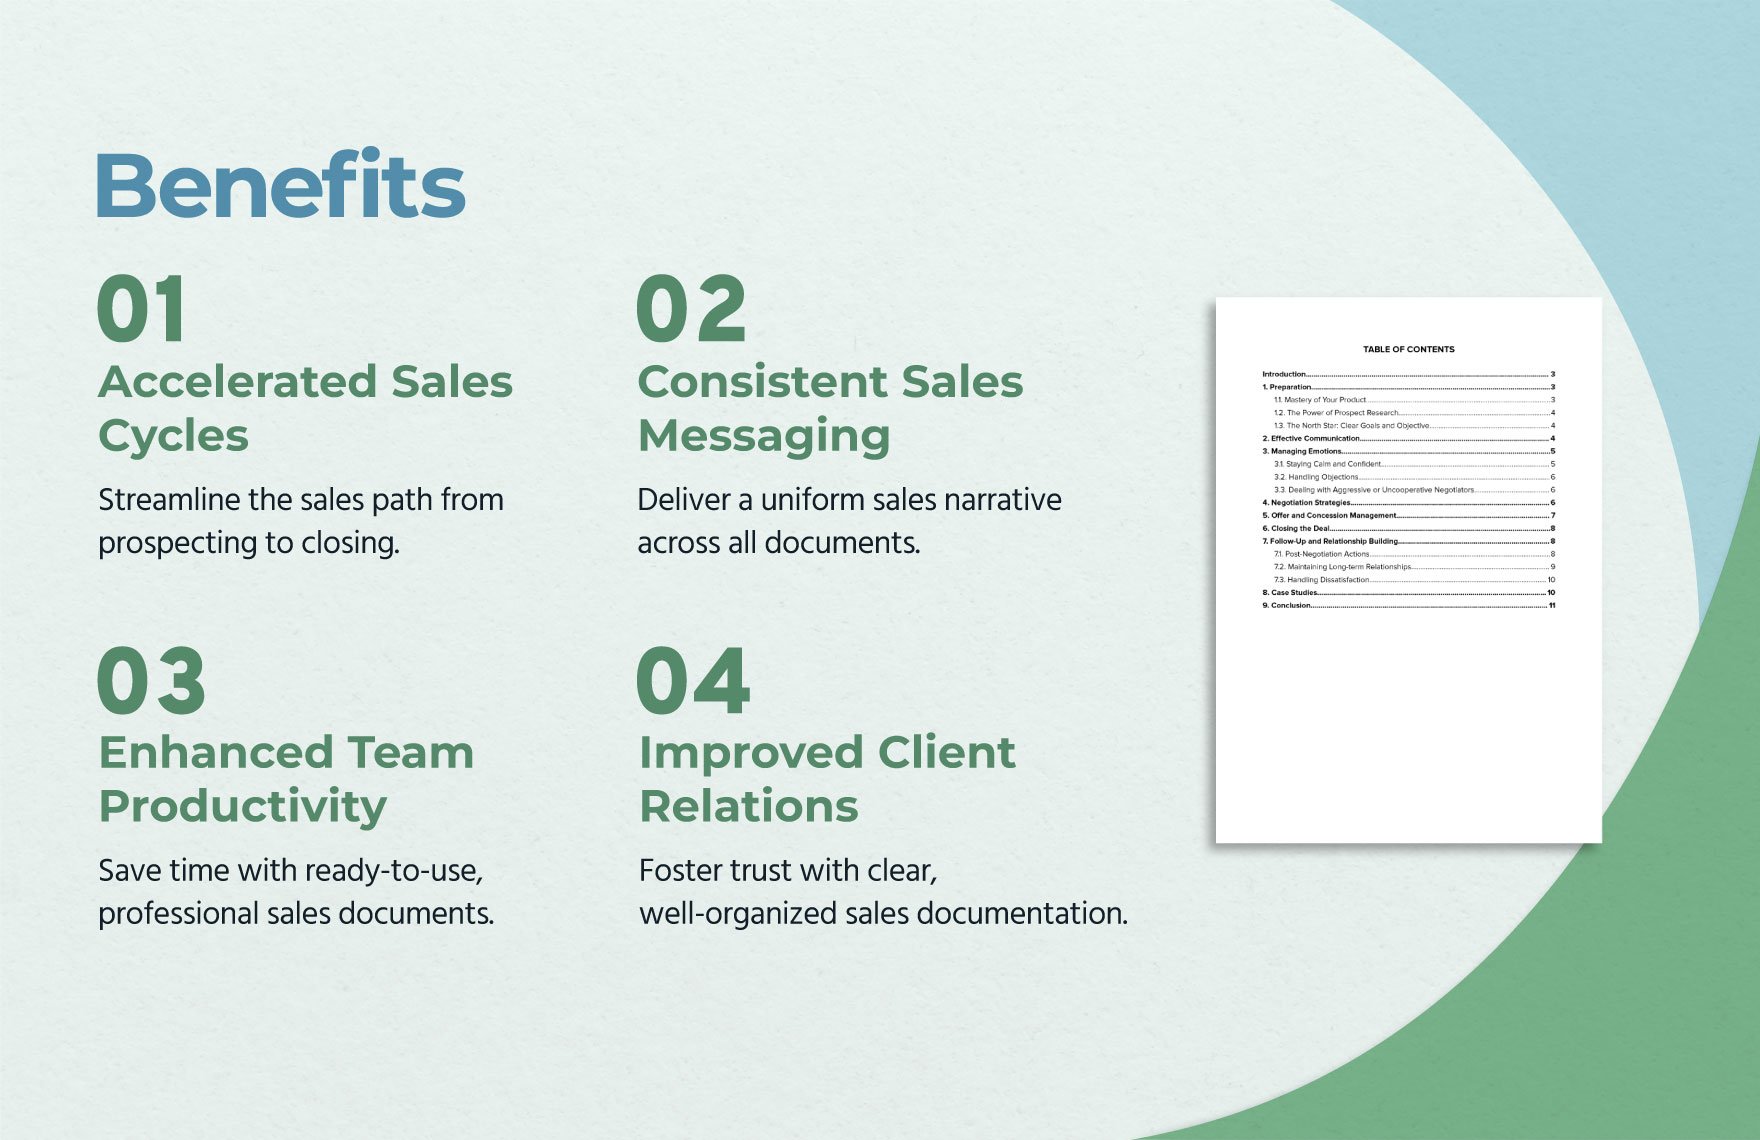 Sales Guide to Handling Difficult Negotiations Template